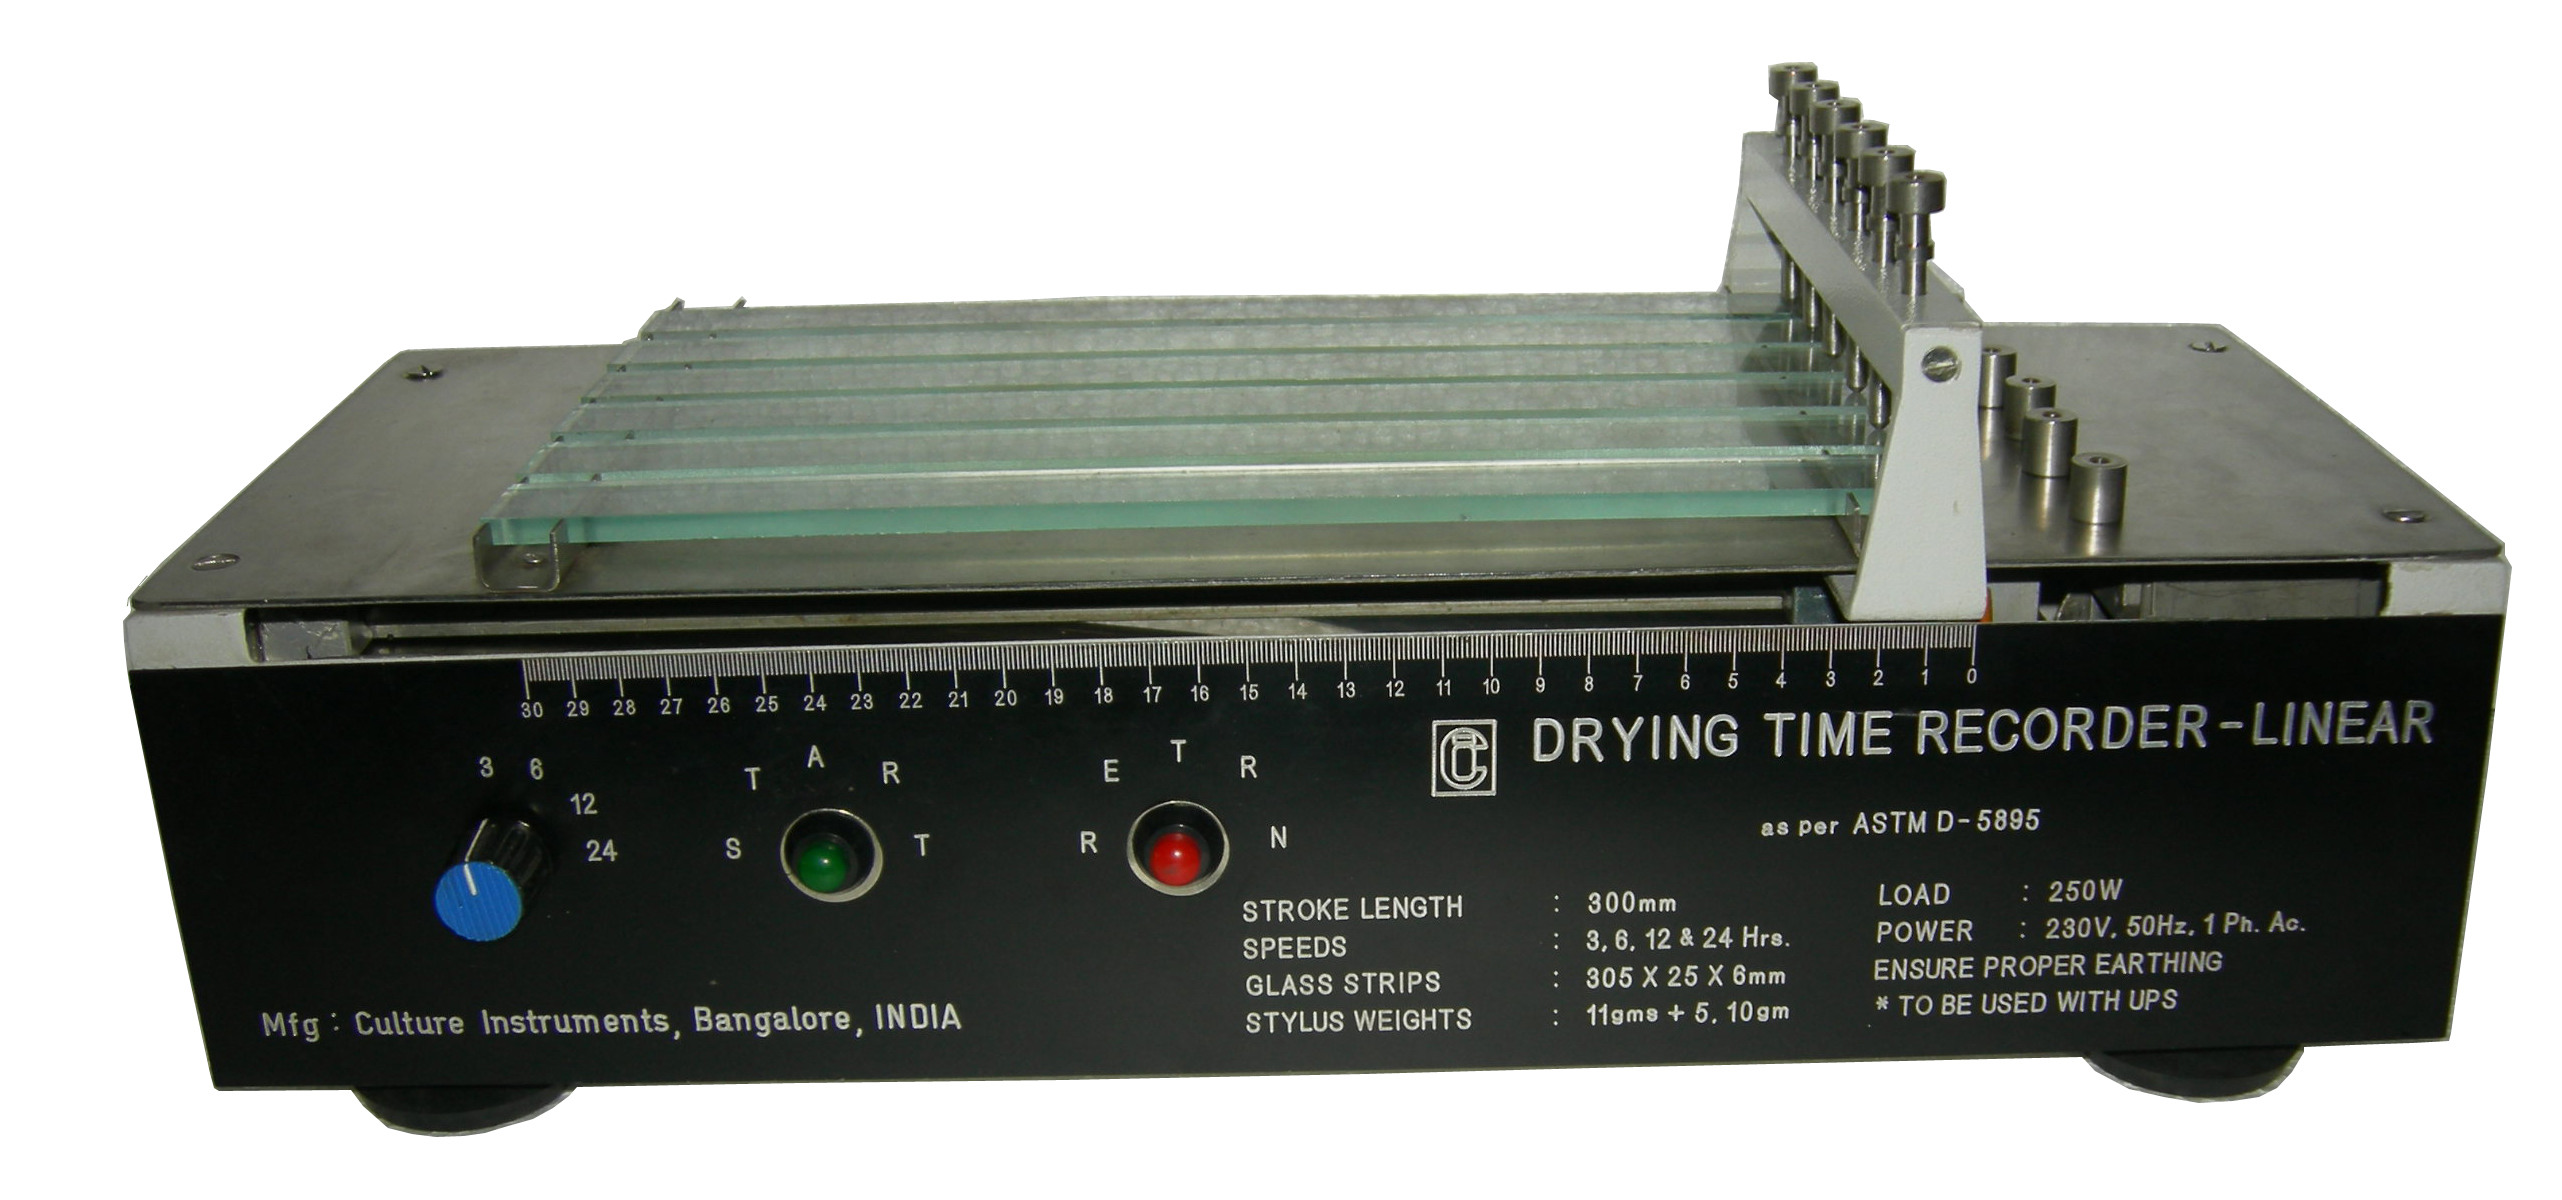 'CI' DRYING TIME RECORDER-LINEAR